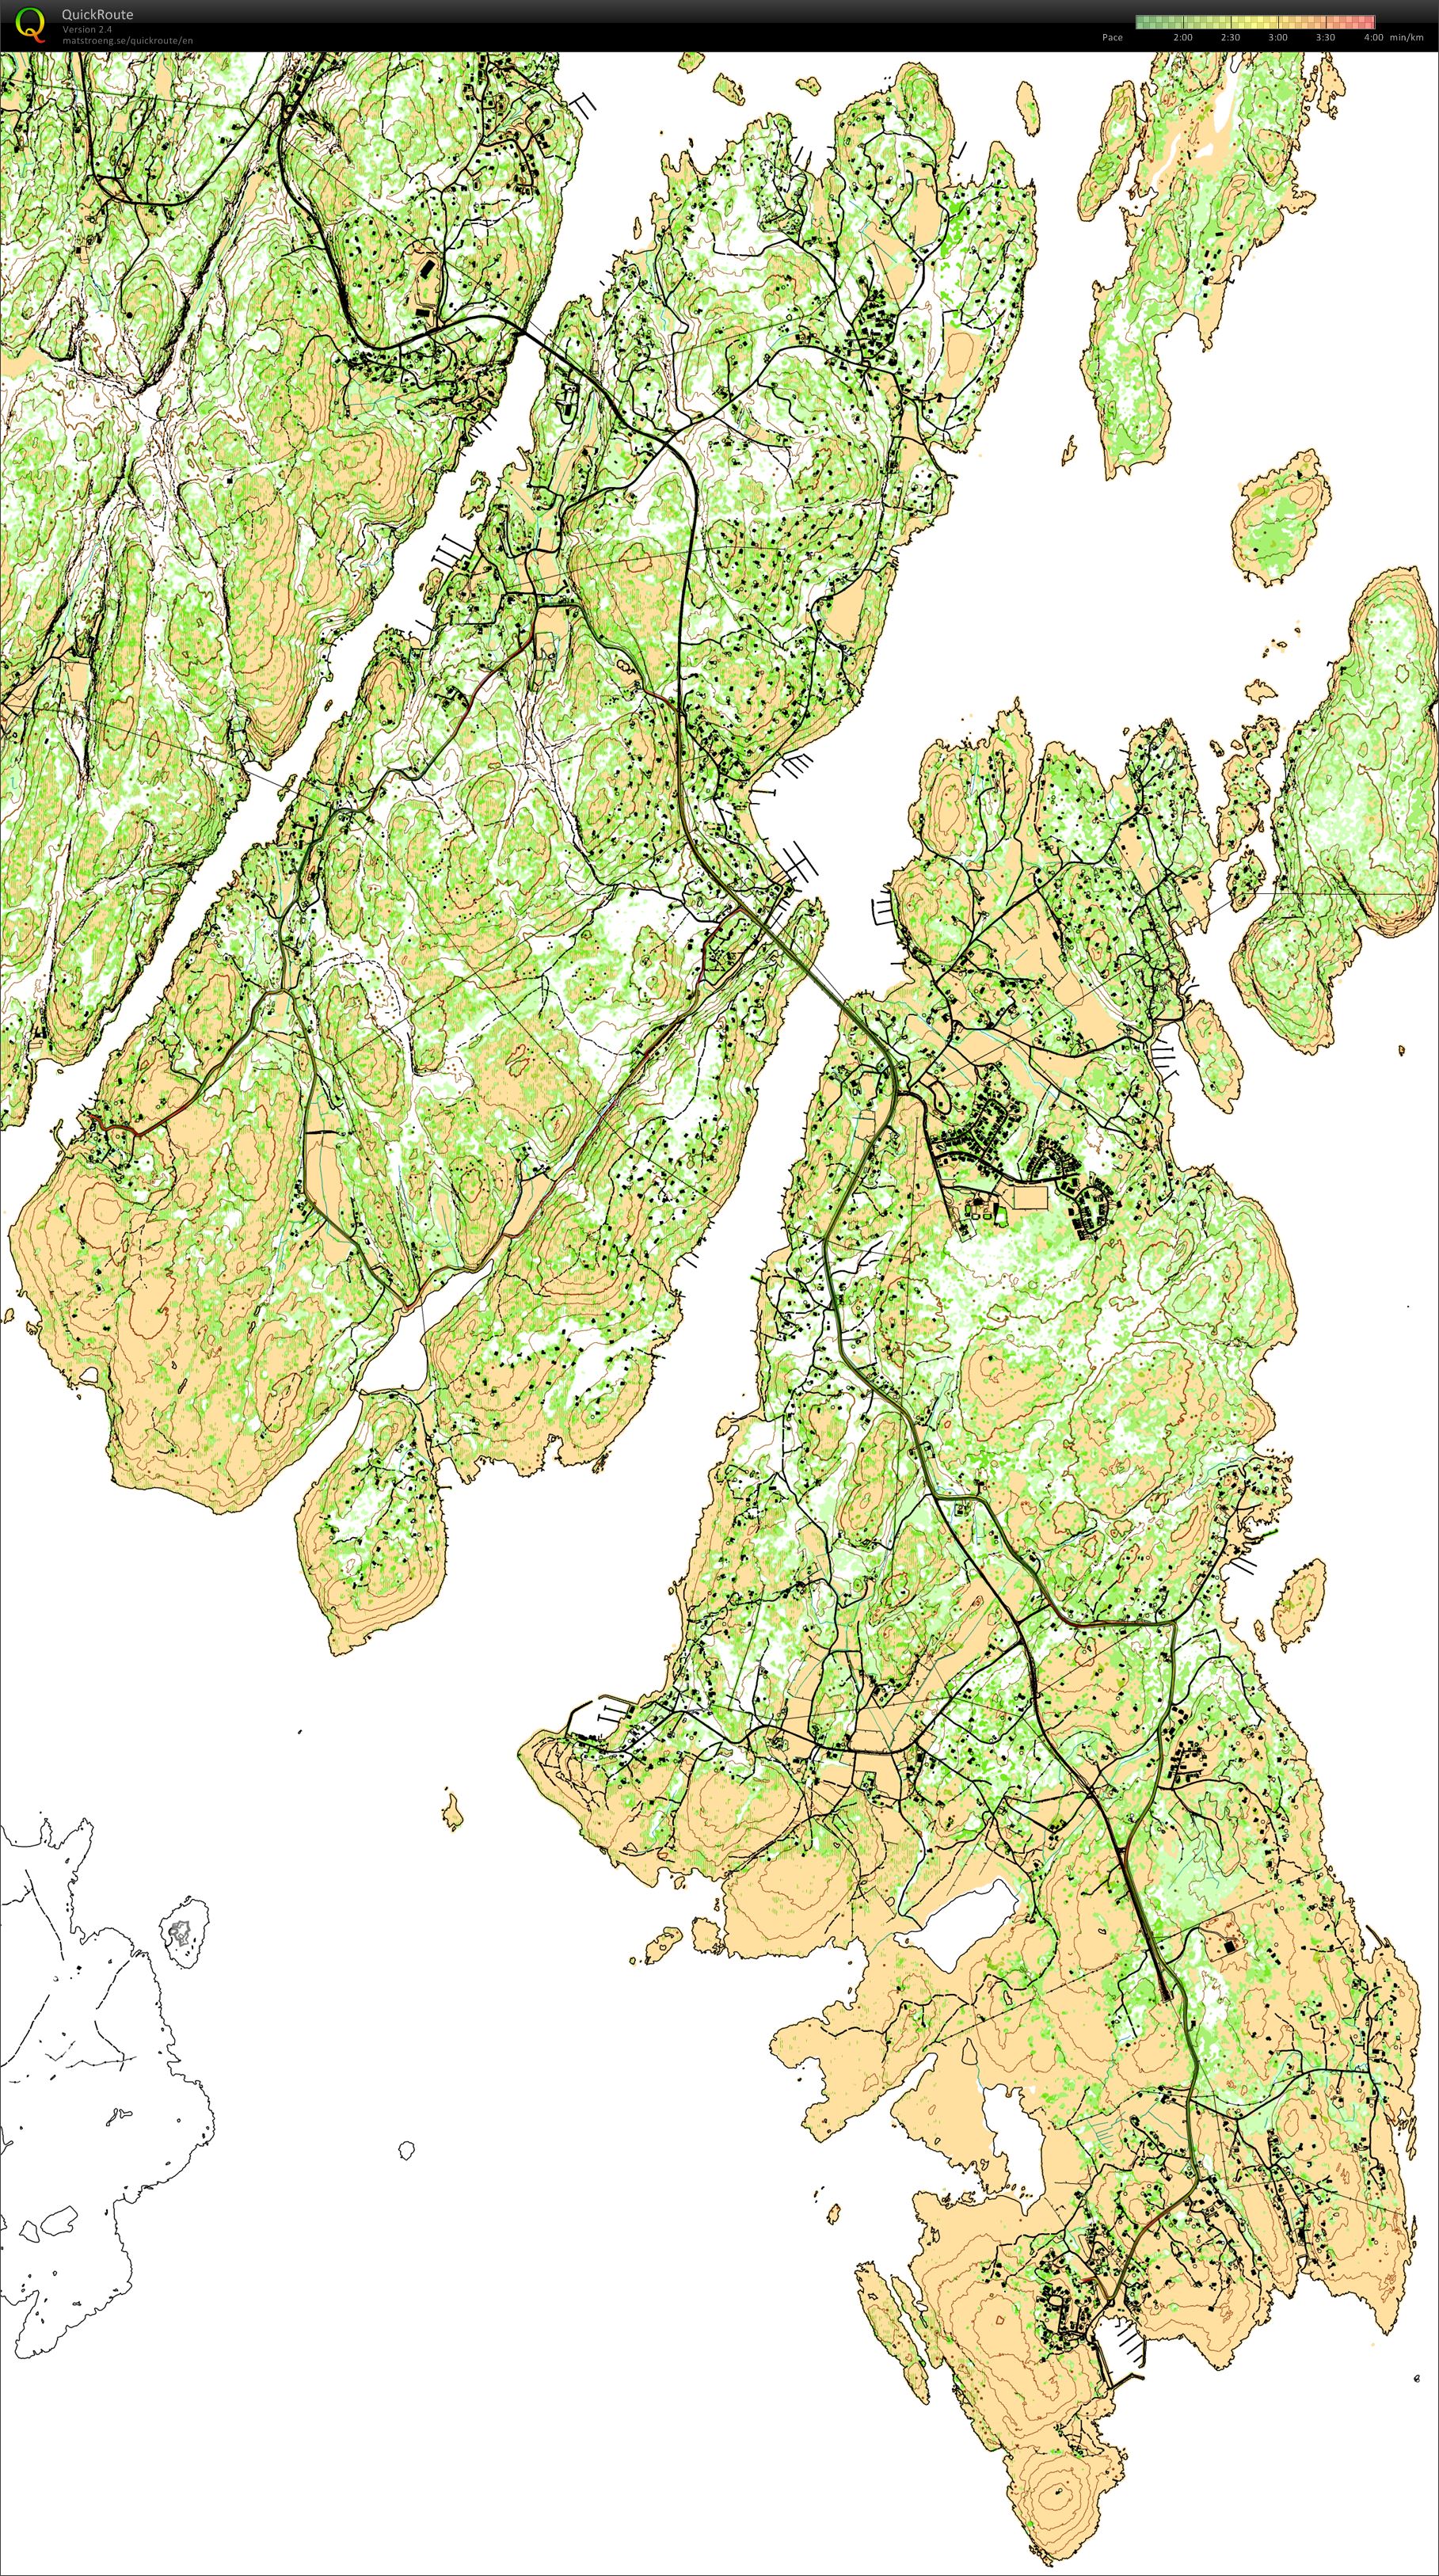 Bike ride on Asmaloy and Spjærøy, using autogenerated map (2014-07-06)